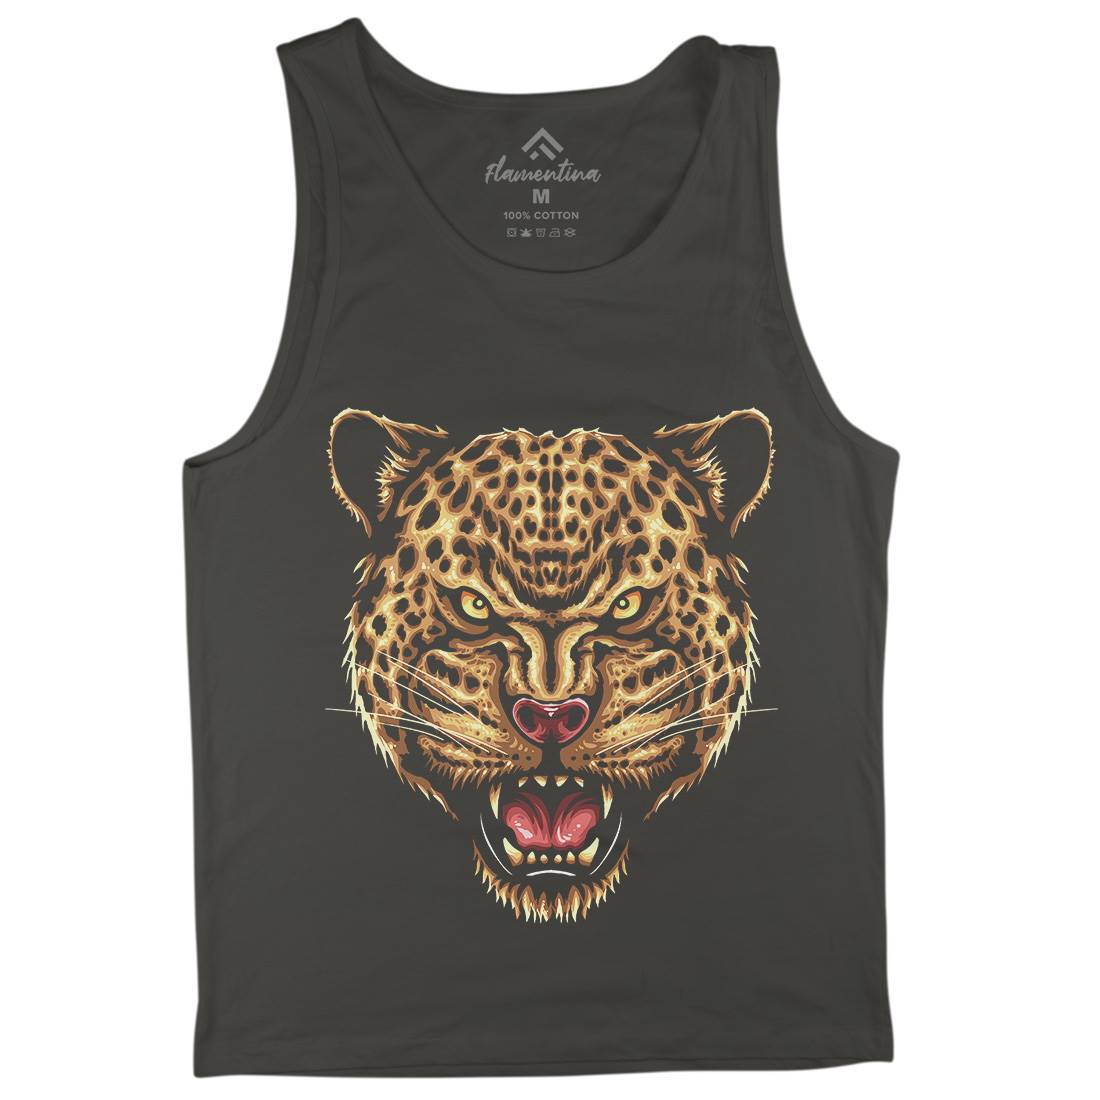 Strength And Focus Mens Tank Top Vest Animals A470